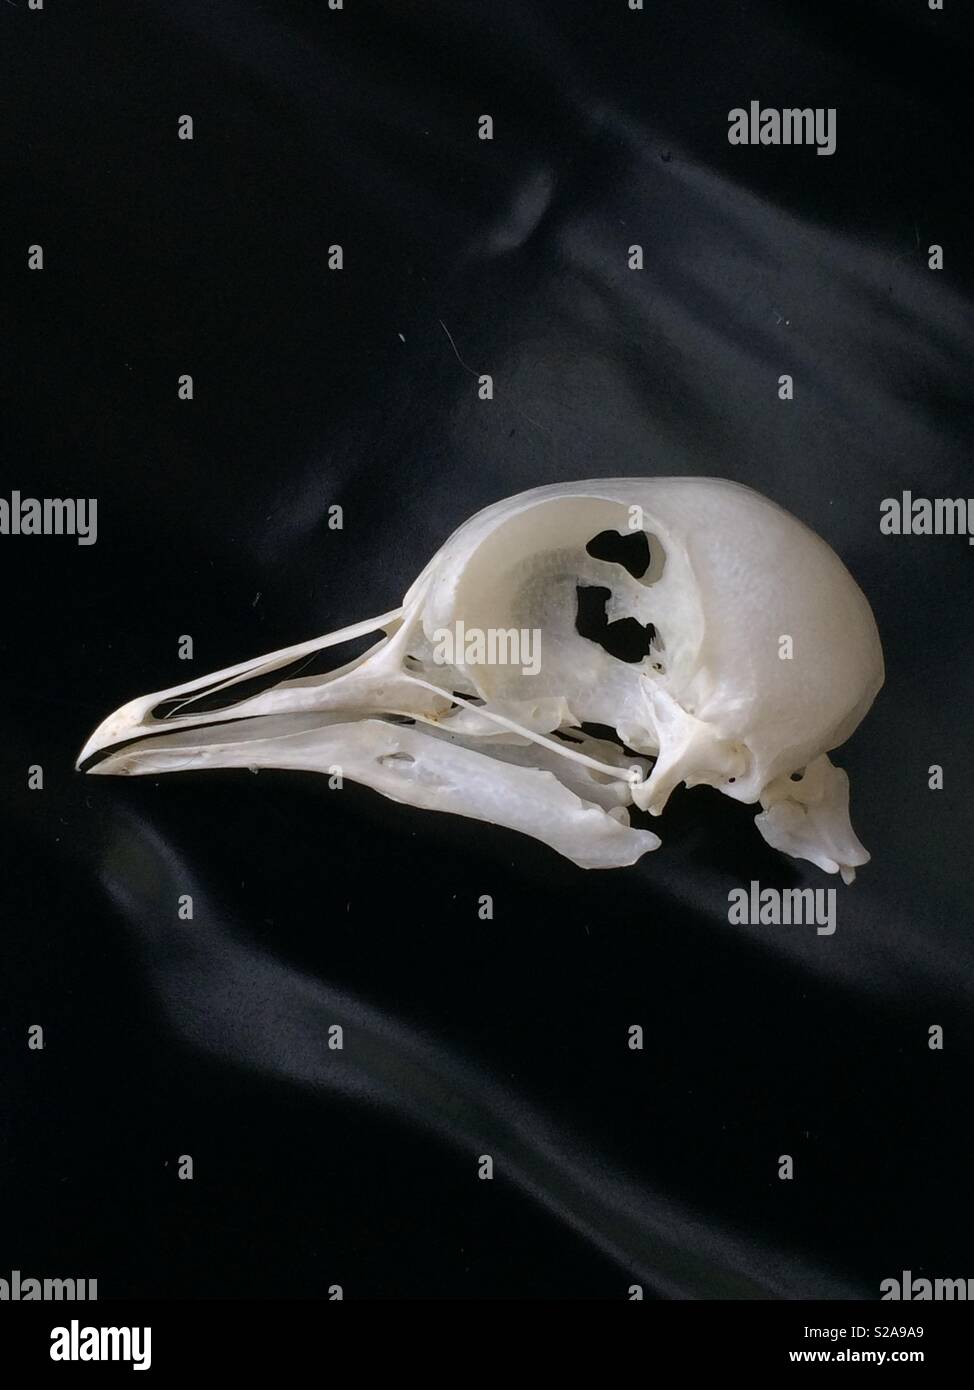 Pigeon skull and neck, side view Stock Photo